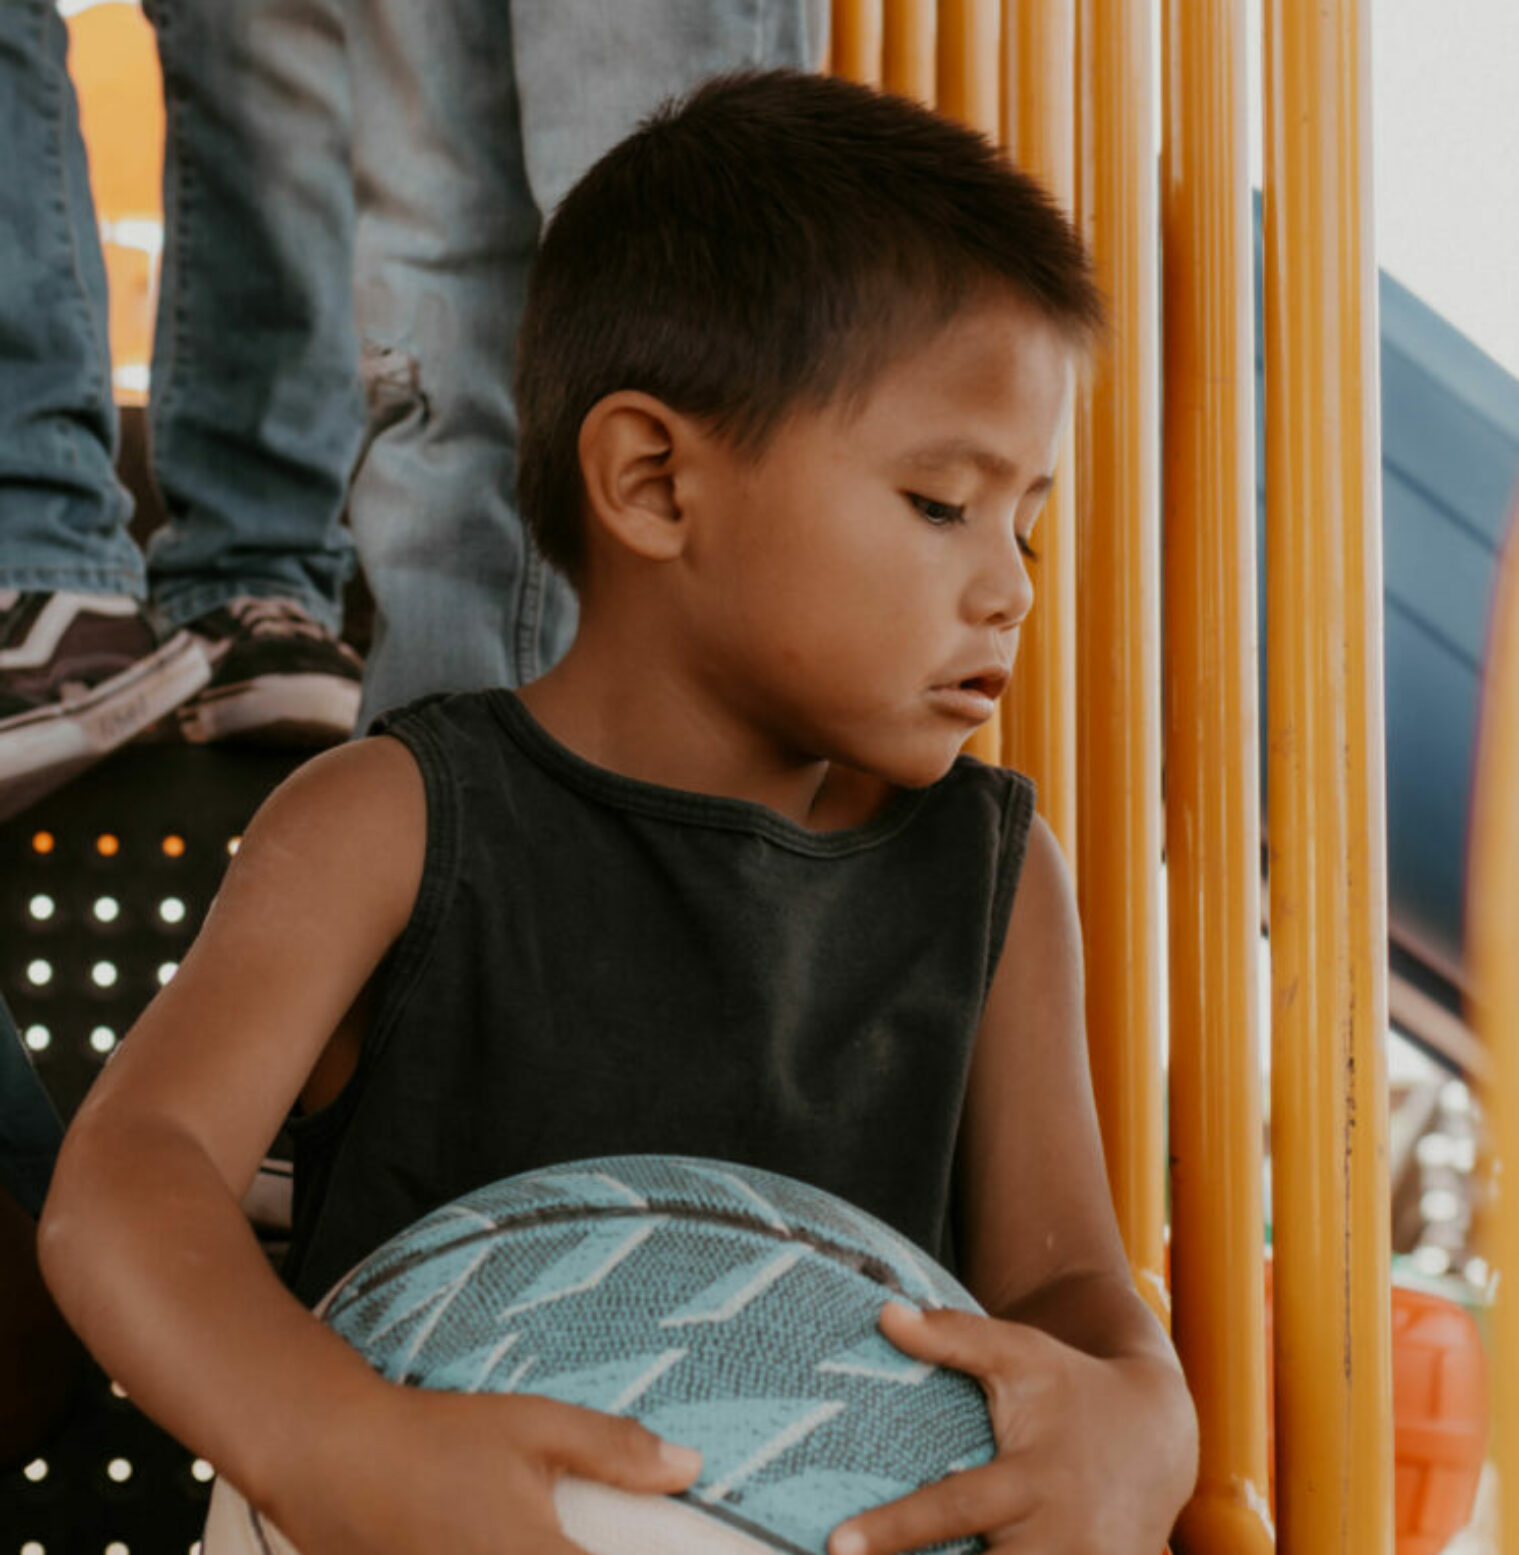 A young boy looks down while holding a basketball